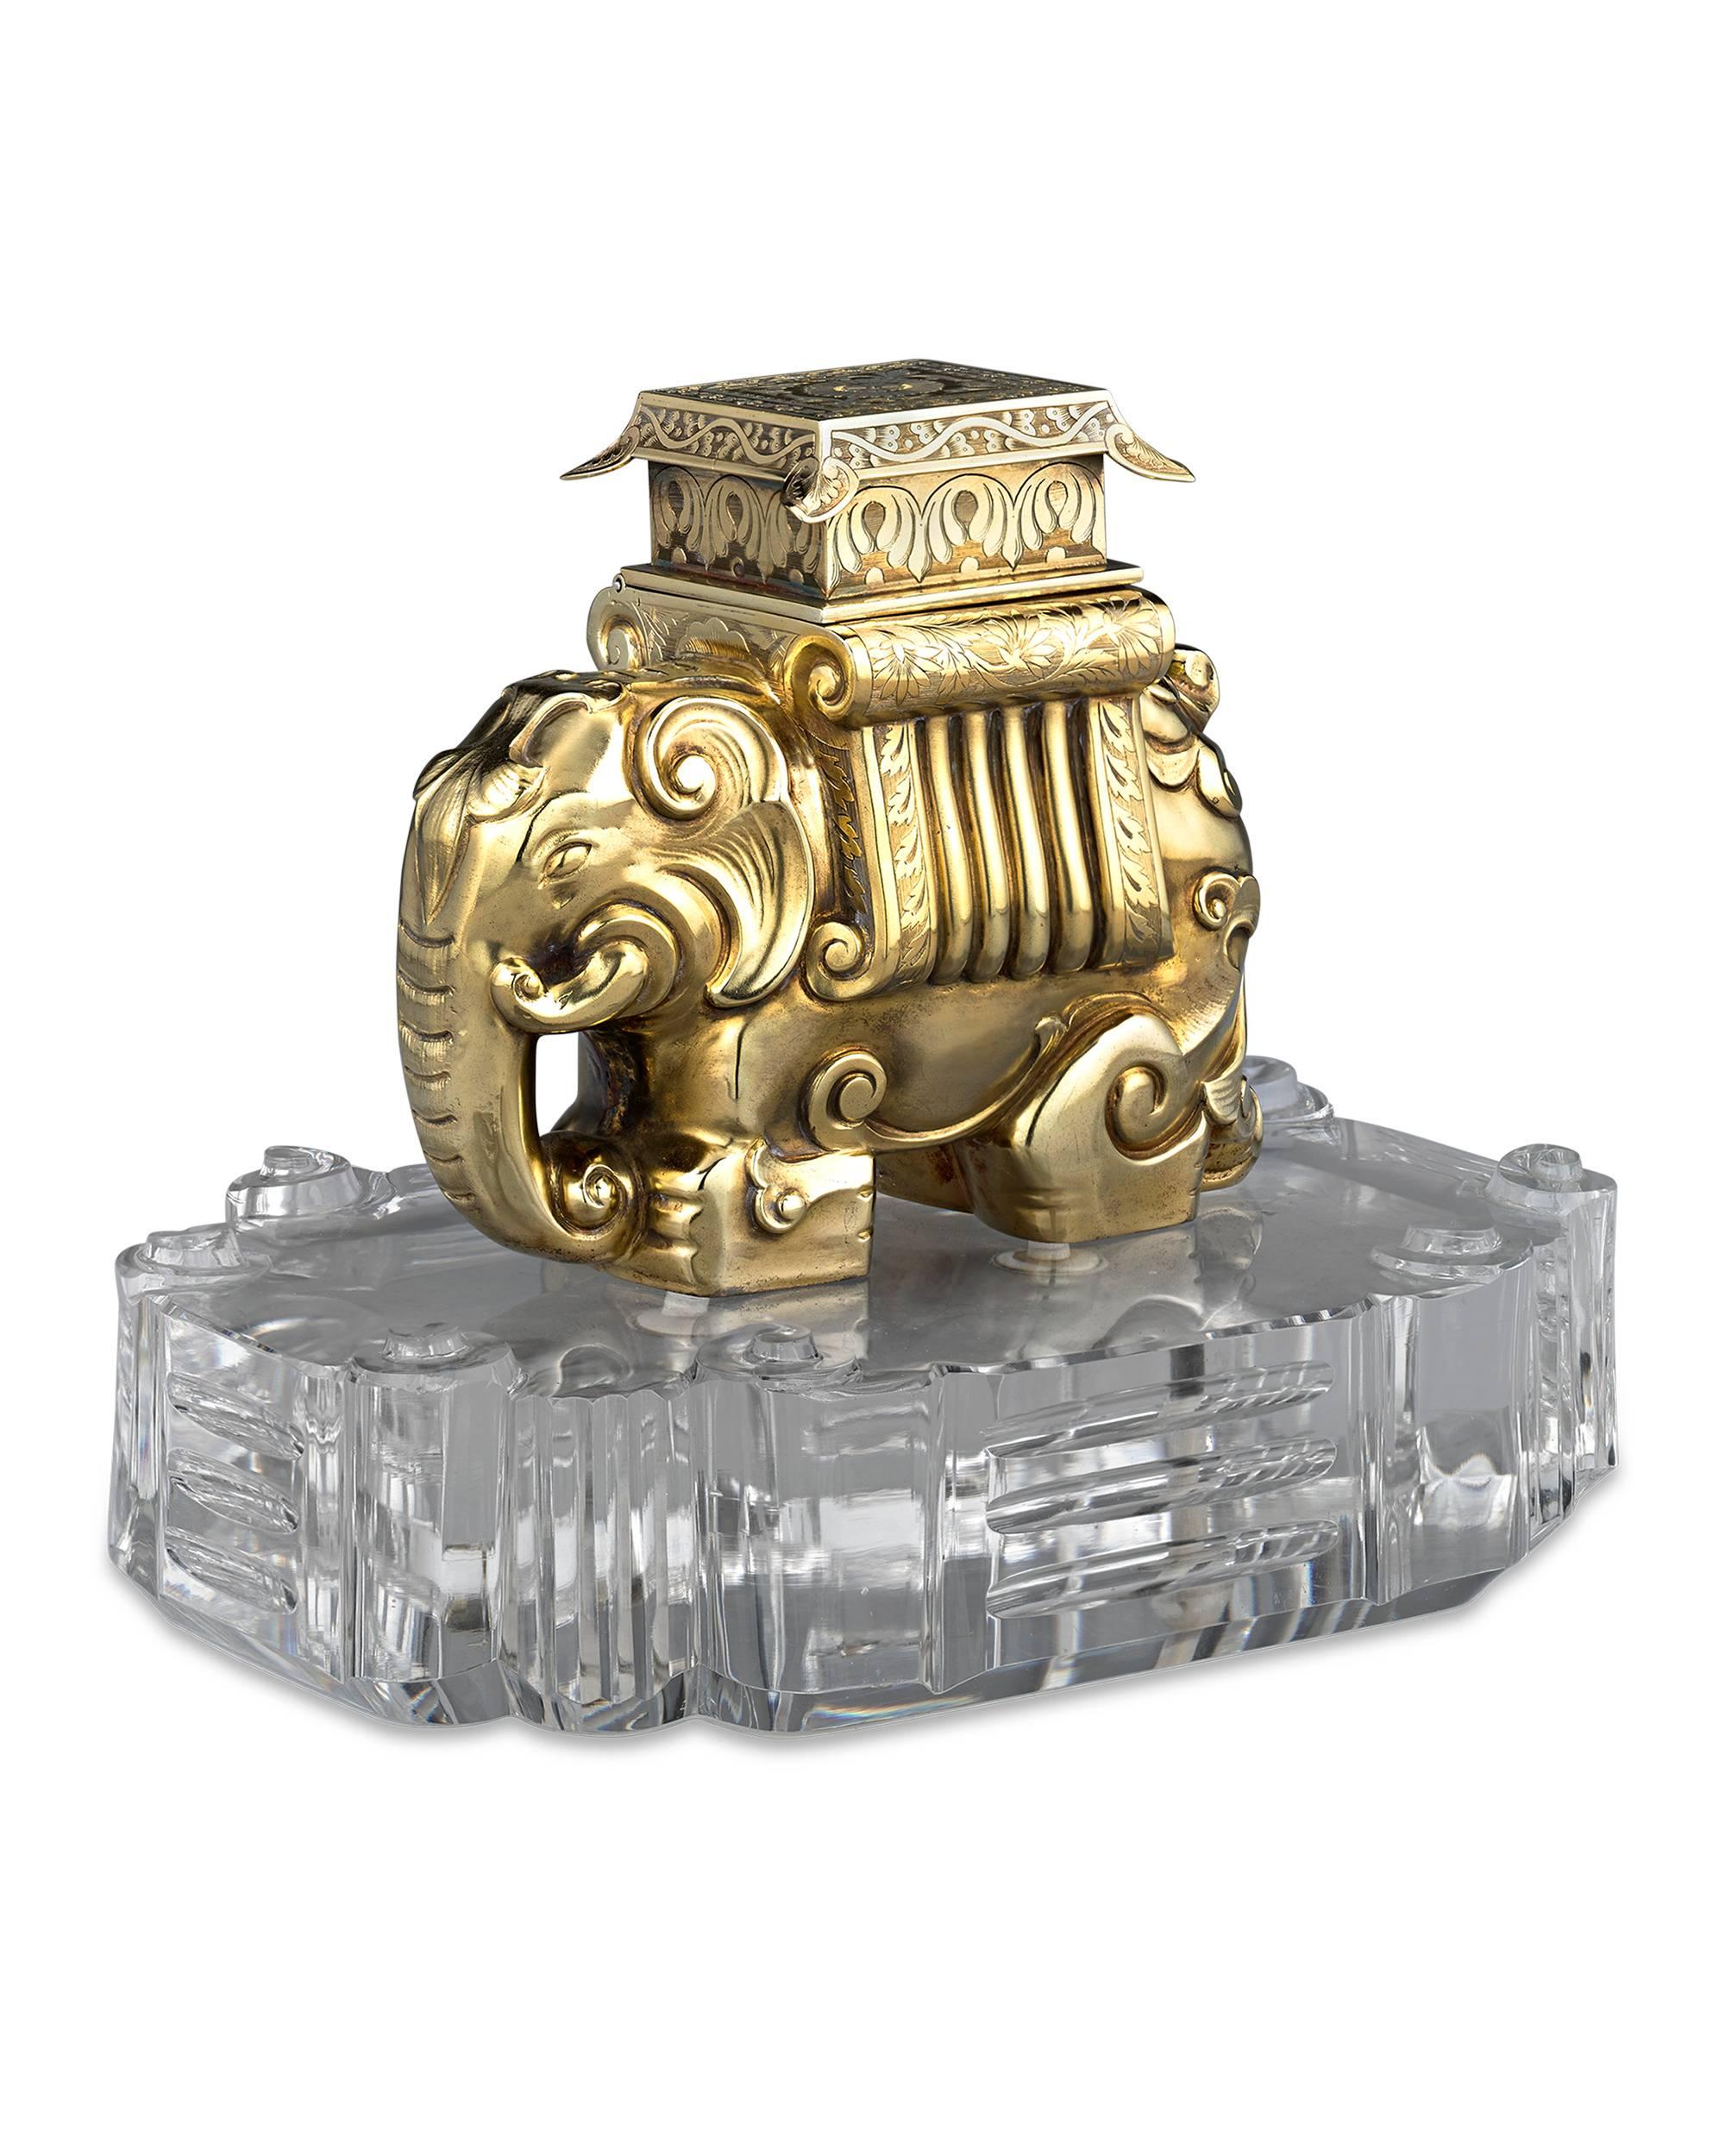 Both an opulent objet d'art and utilitarian accessory, this magnificent British inkwell takes the form of a silver gilt Indian elephant resting upon a base of carved rock crystal. This is a form of inkwell we have never seen before, and given the